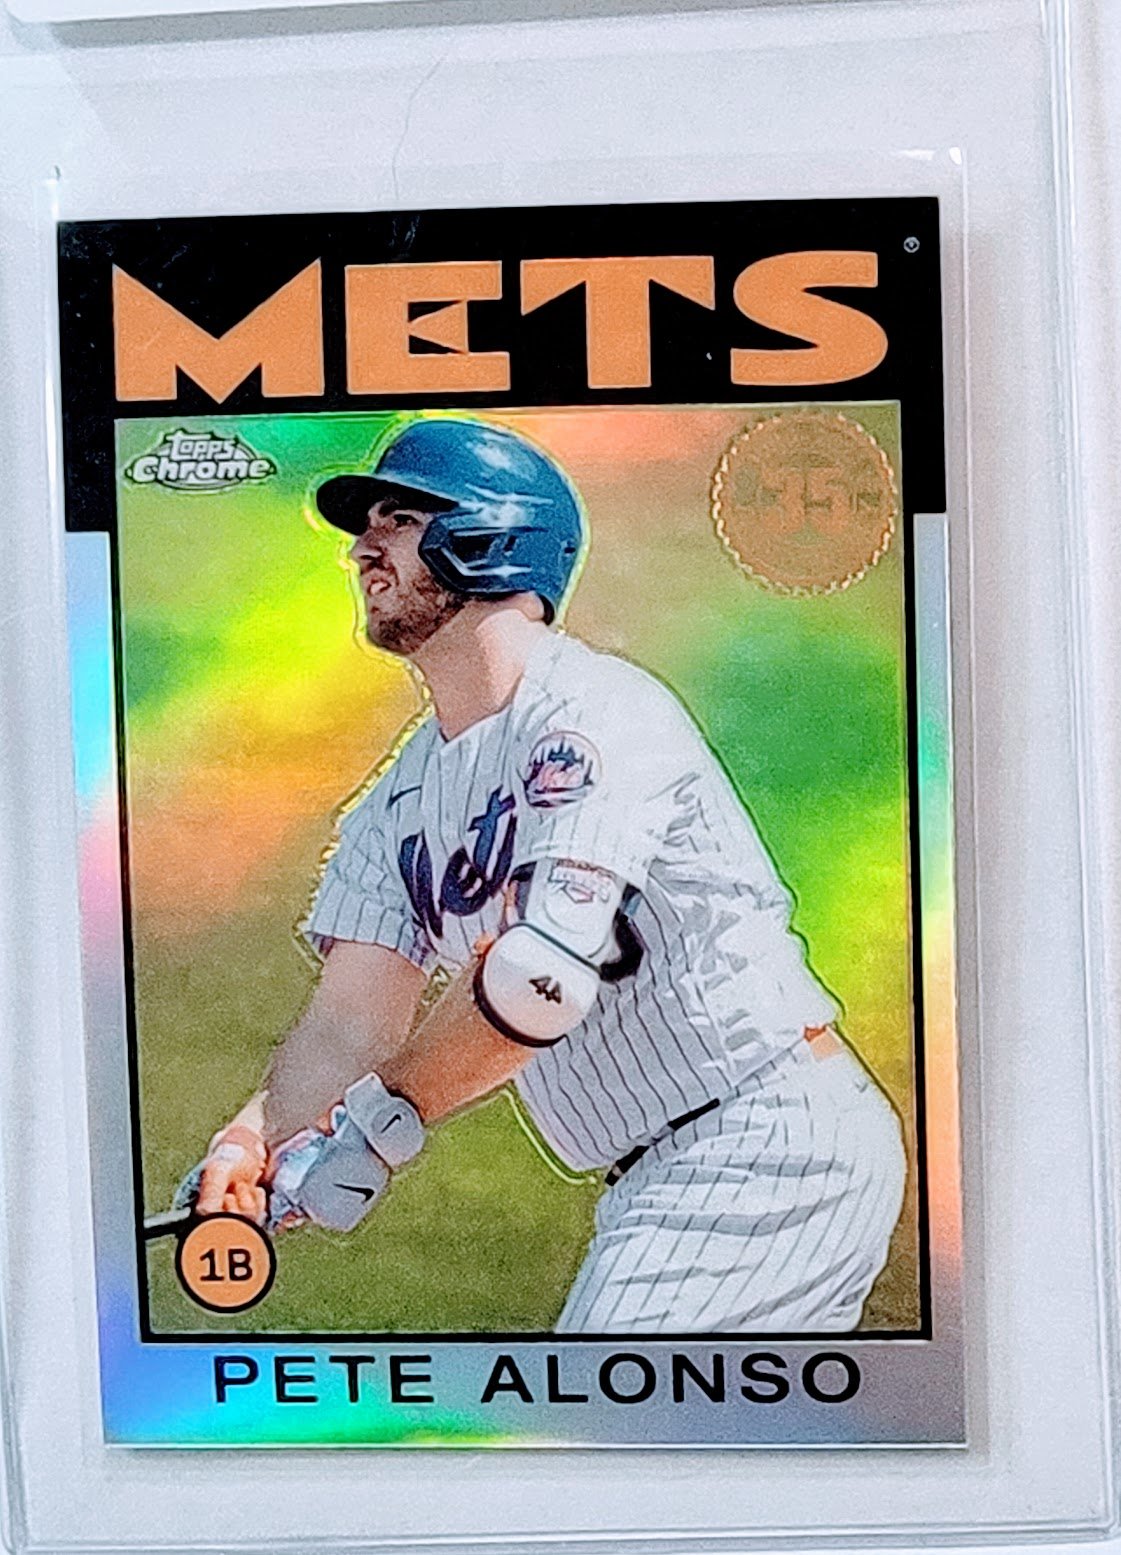 2021 Topps Chrome Pete Alonso 1986 35th Anniversary Refractor Baseball Trading Card TPTV simple Xclusive Collectibles   